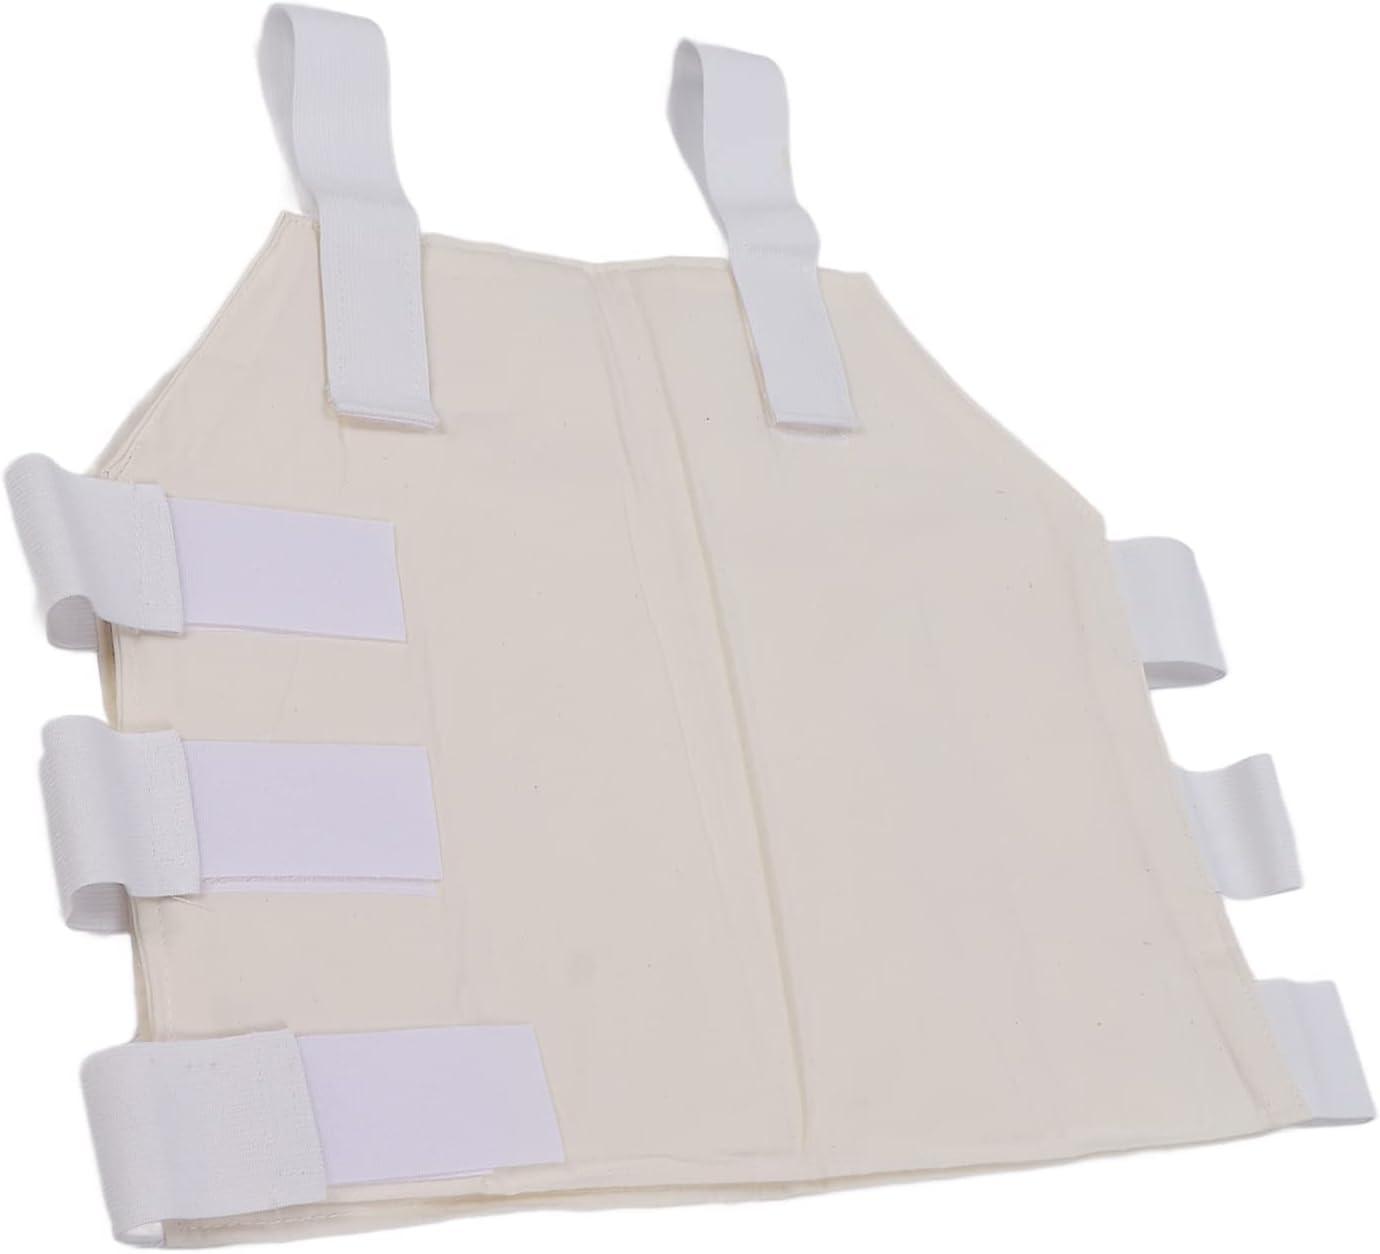 Armor Adult Unisex Chest Support Brace to Stabilize the Thorax after Open  Heart Surgery, Thoracic Procedure, or Fractures of the Sternum or Rib Cage